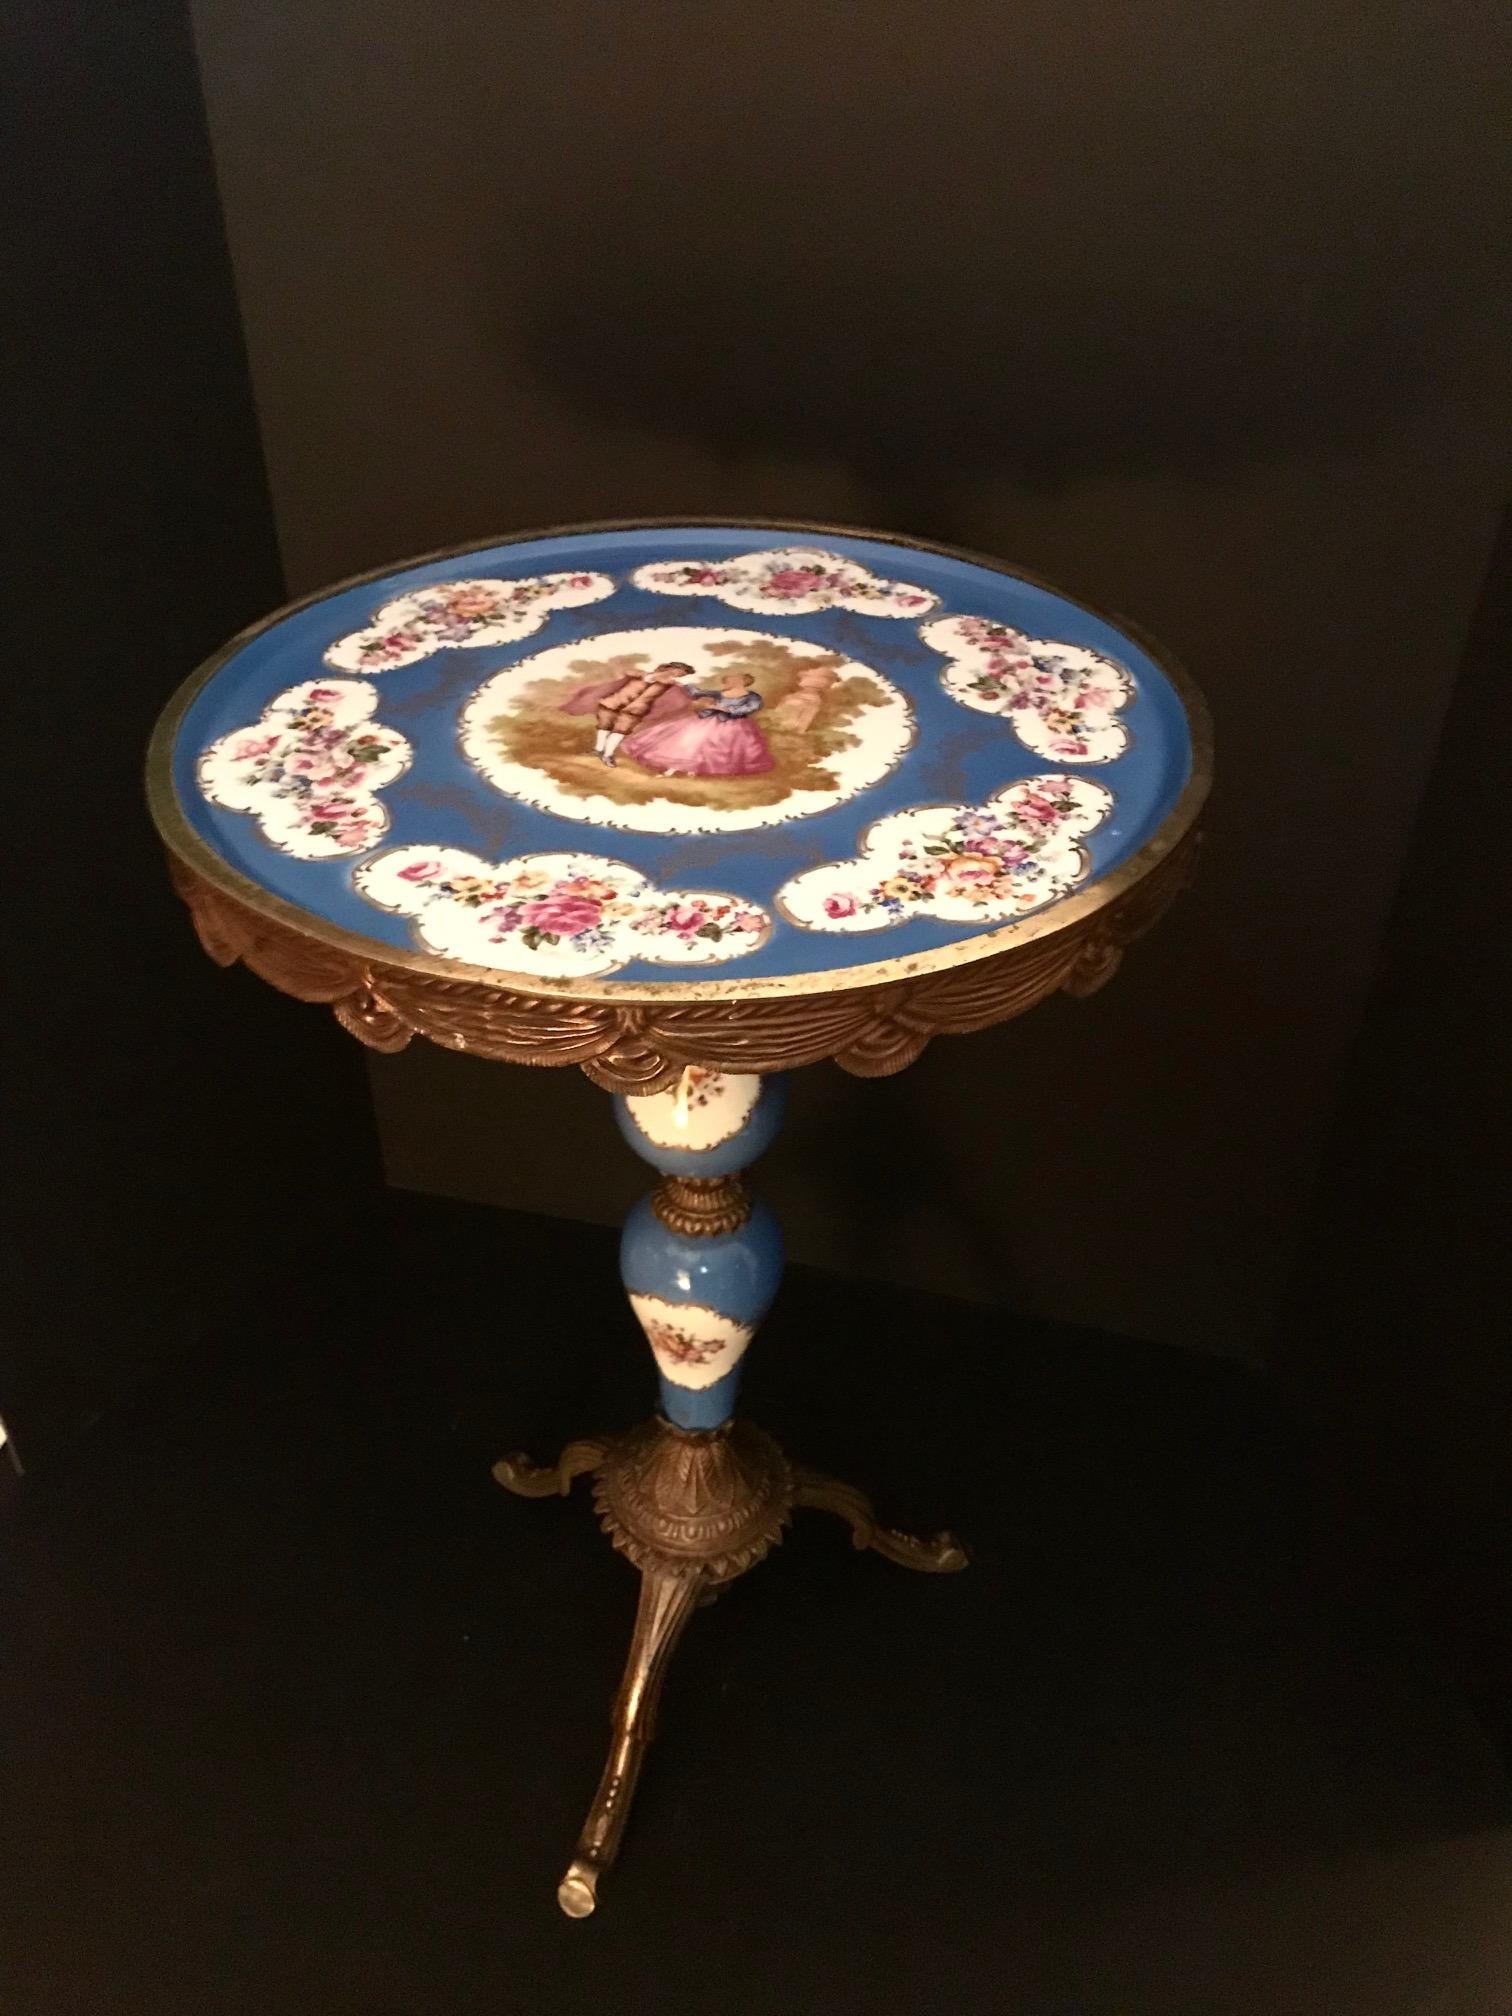 This Sevres style decorative side table has a circular top and stem decorated with transfer foliate sprays on a celestial blue ground. The centre vignette pictures a courting couple after Fragonard. This porcelain table is set in a finely gilded